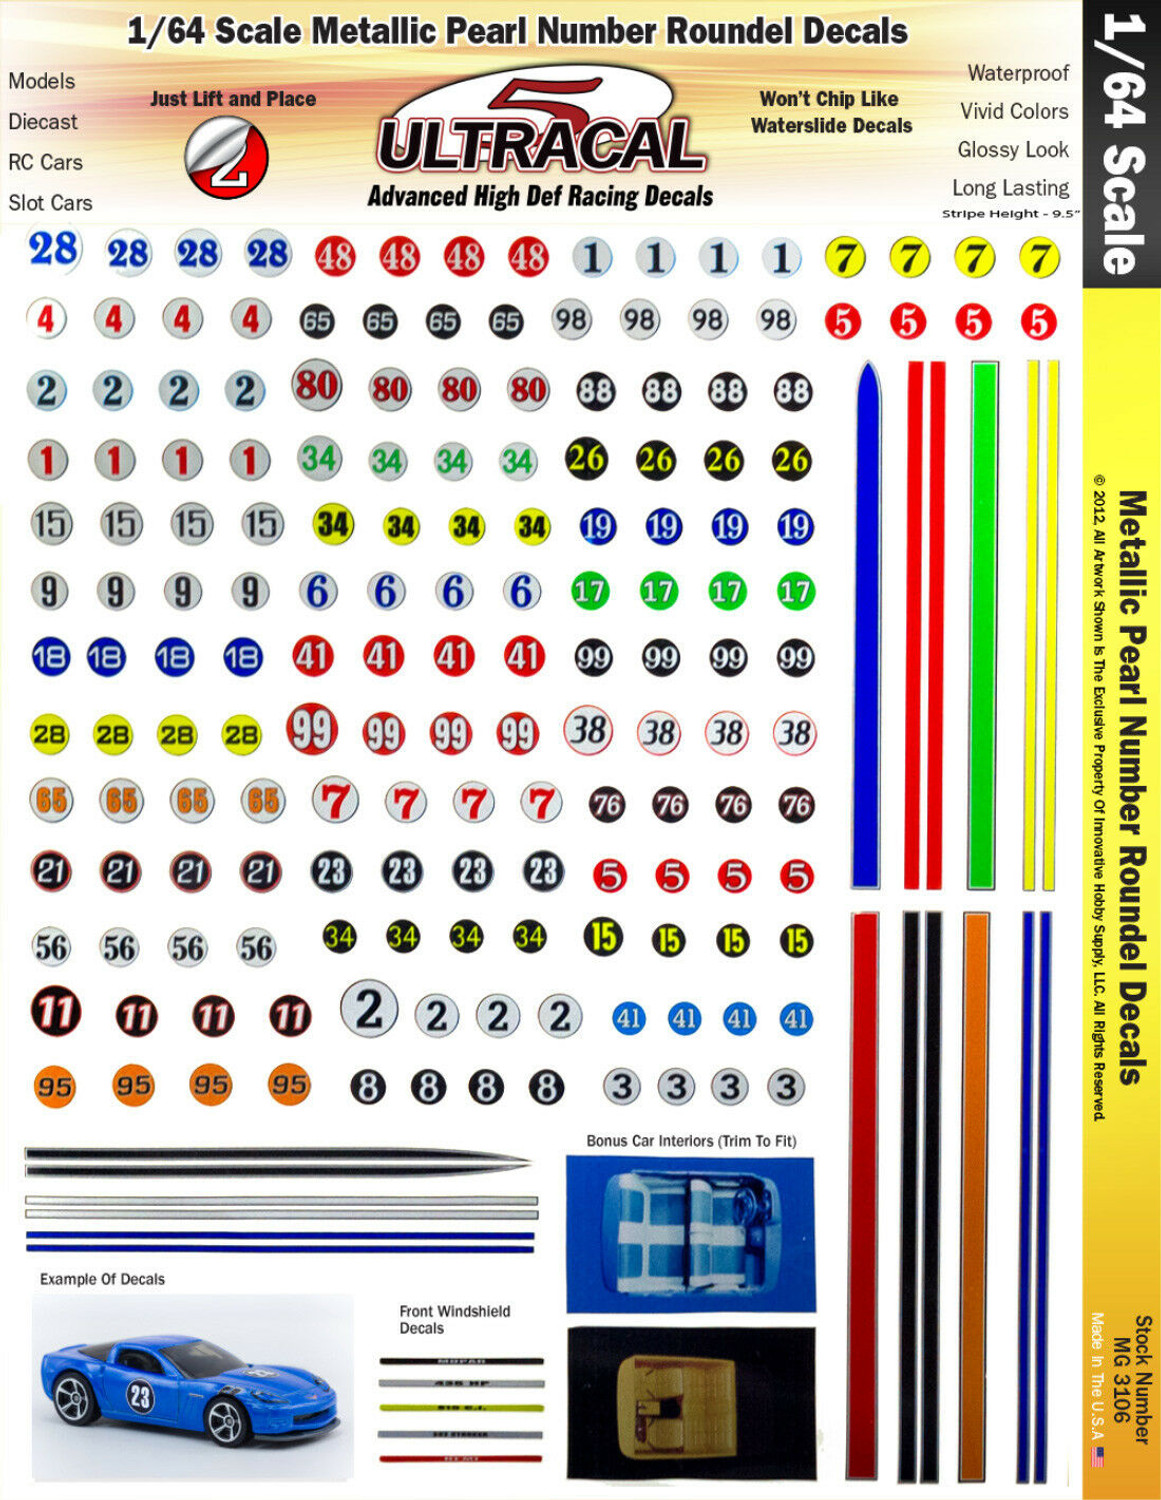 MG 3106 Ultracal Racing Metallic Pearl Number Roundel Decals 1:64 HO Scale